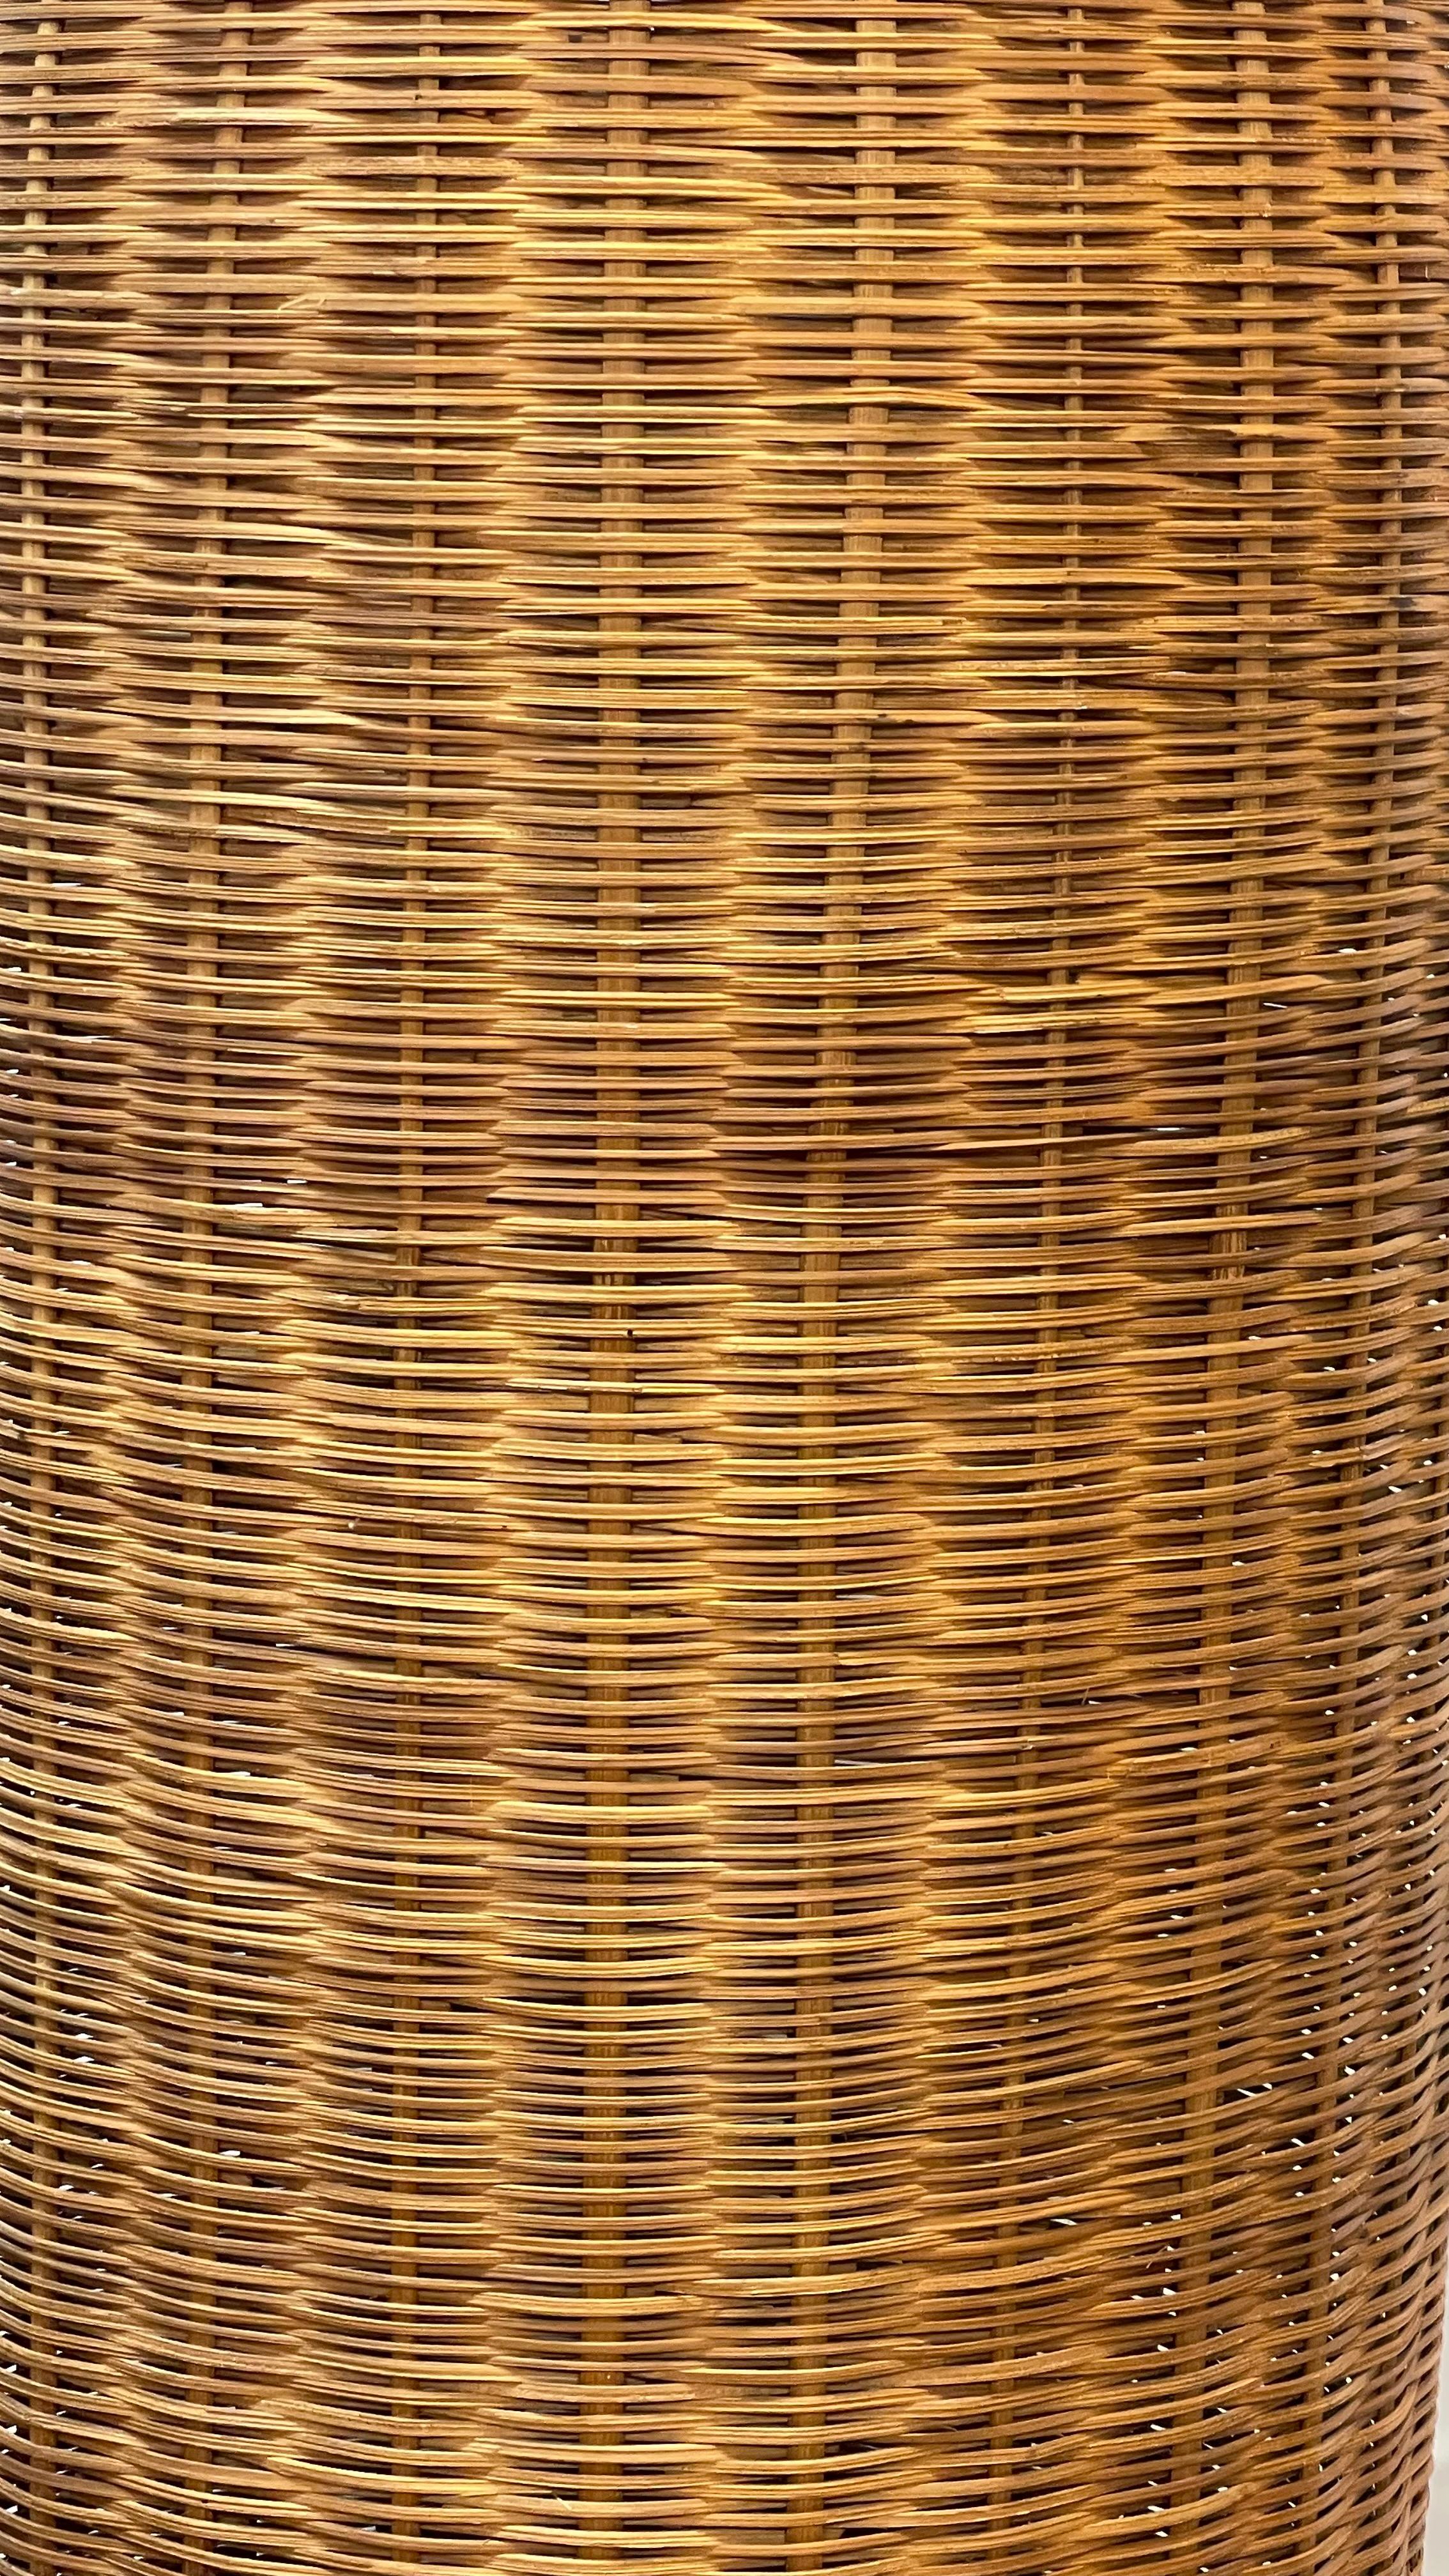 Philippines northLuzon 1960s cylindrical fish trap basket

15 x 15 x 60